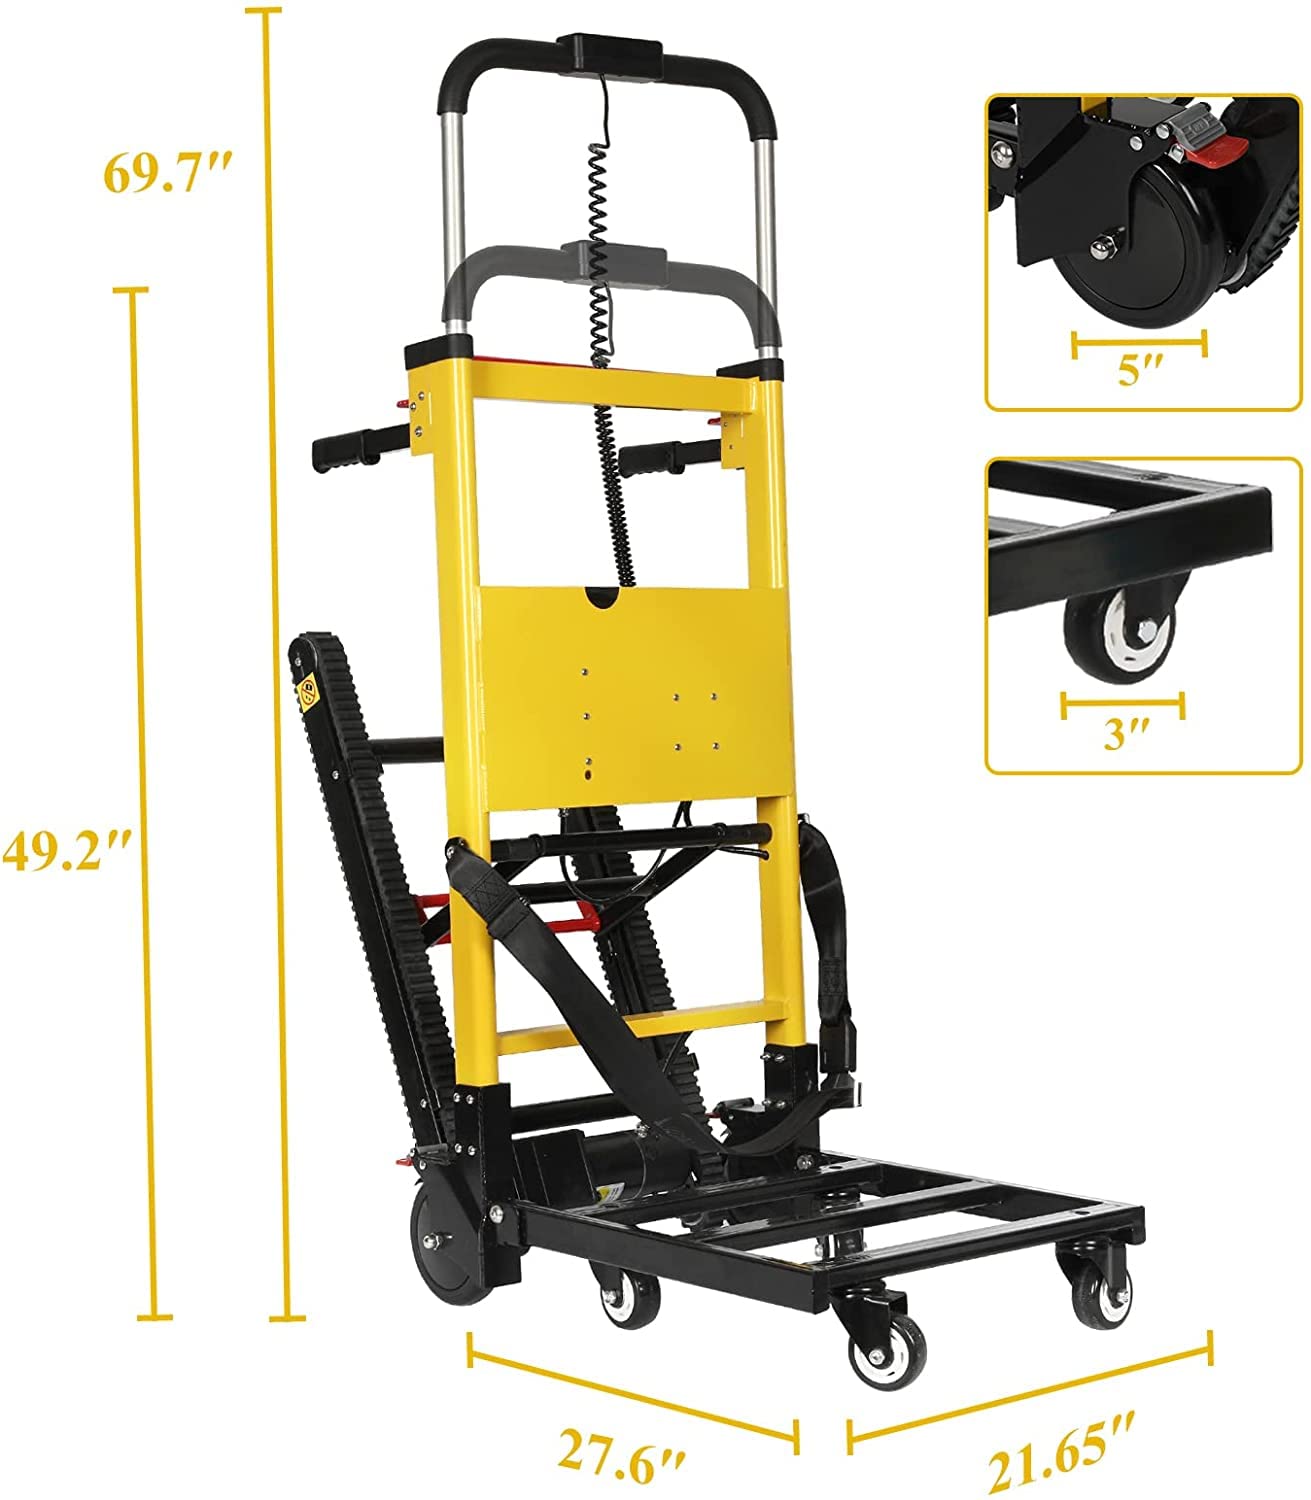 Electric Stair Climbing Hand Trucks Dolly Cart for Moving 441lb Capacity Heavy Duty Folding Stair Climber Cart Hand Trolley with 6 Wheels Motor Battery Powered for Furniture Family Logistics Warehouse